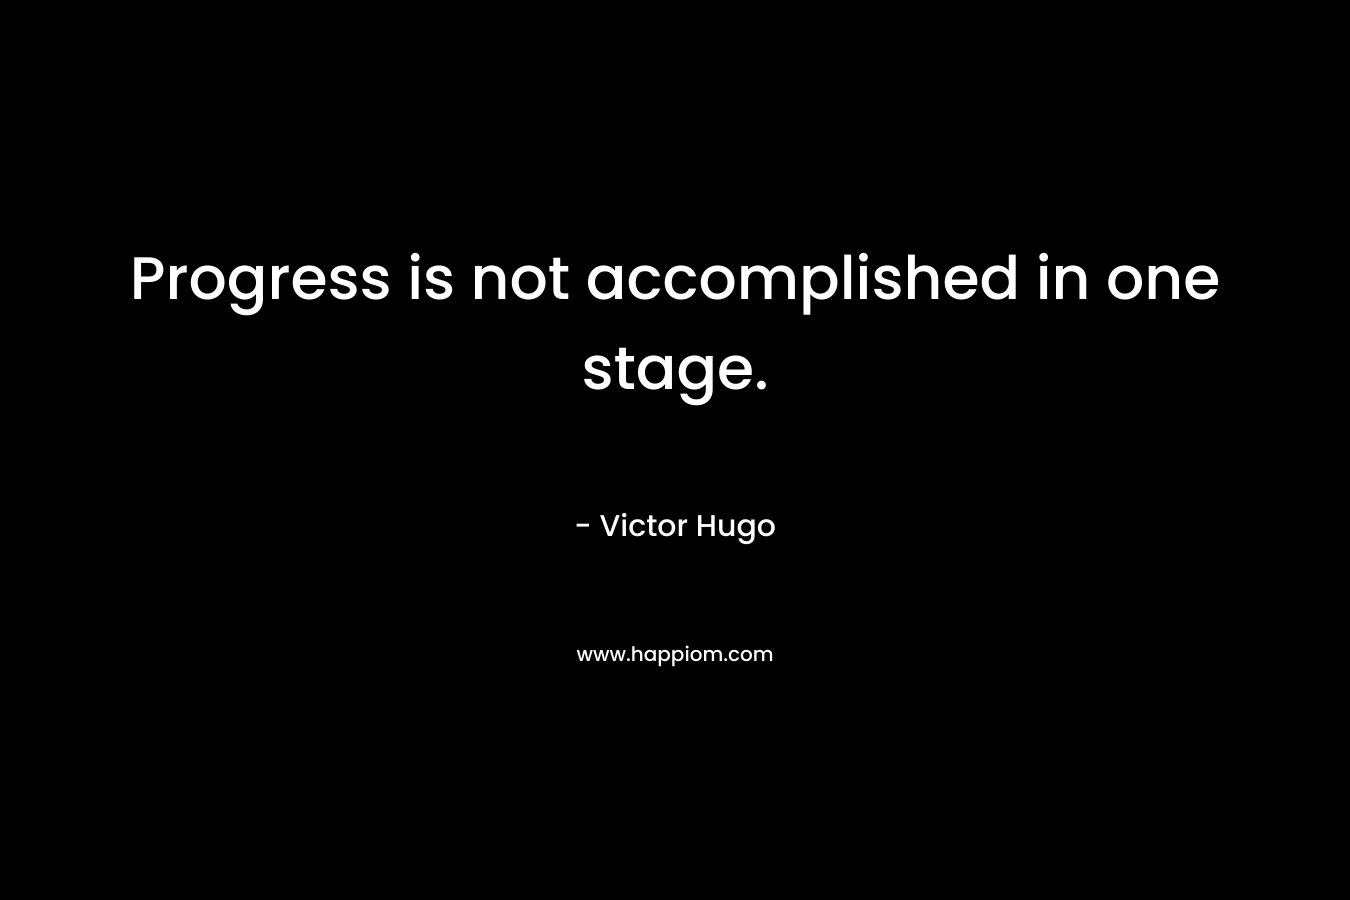 Progress is not accomplished in one stage. – Victor Hugo